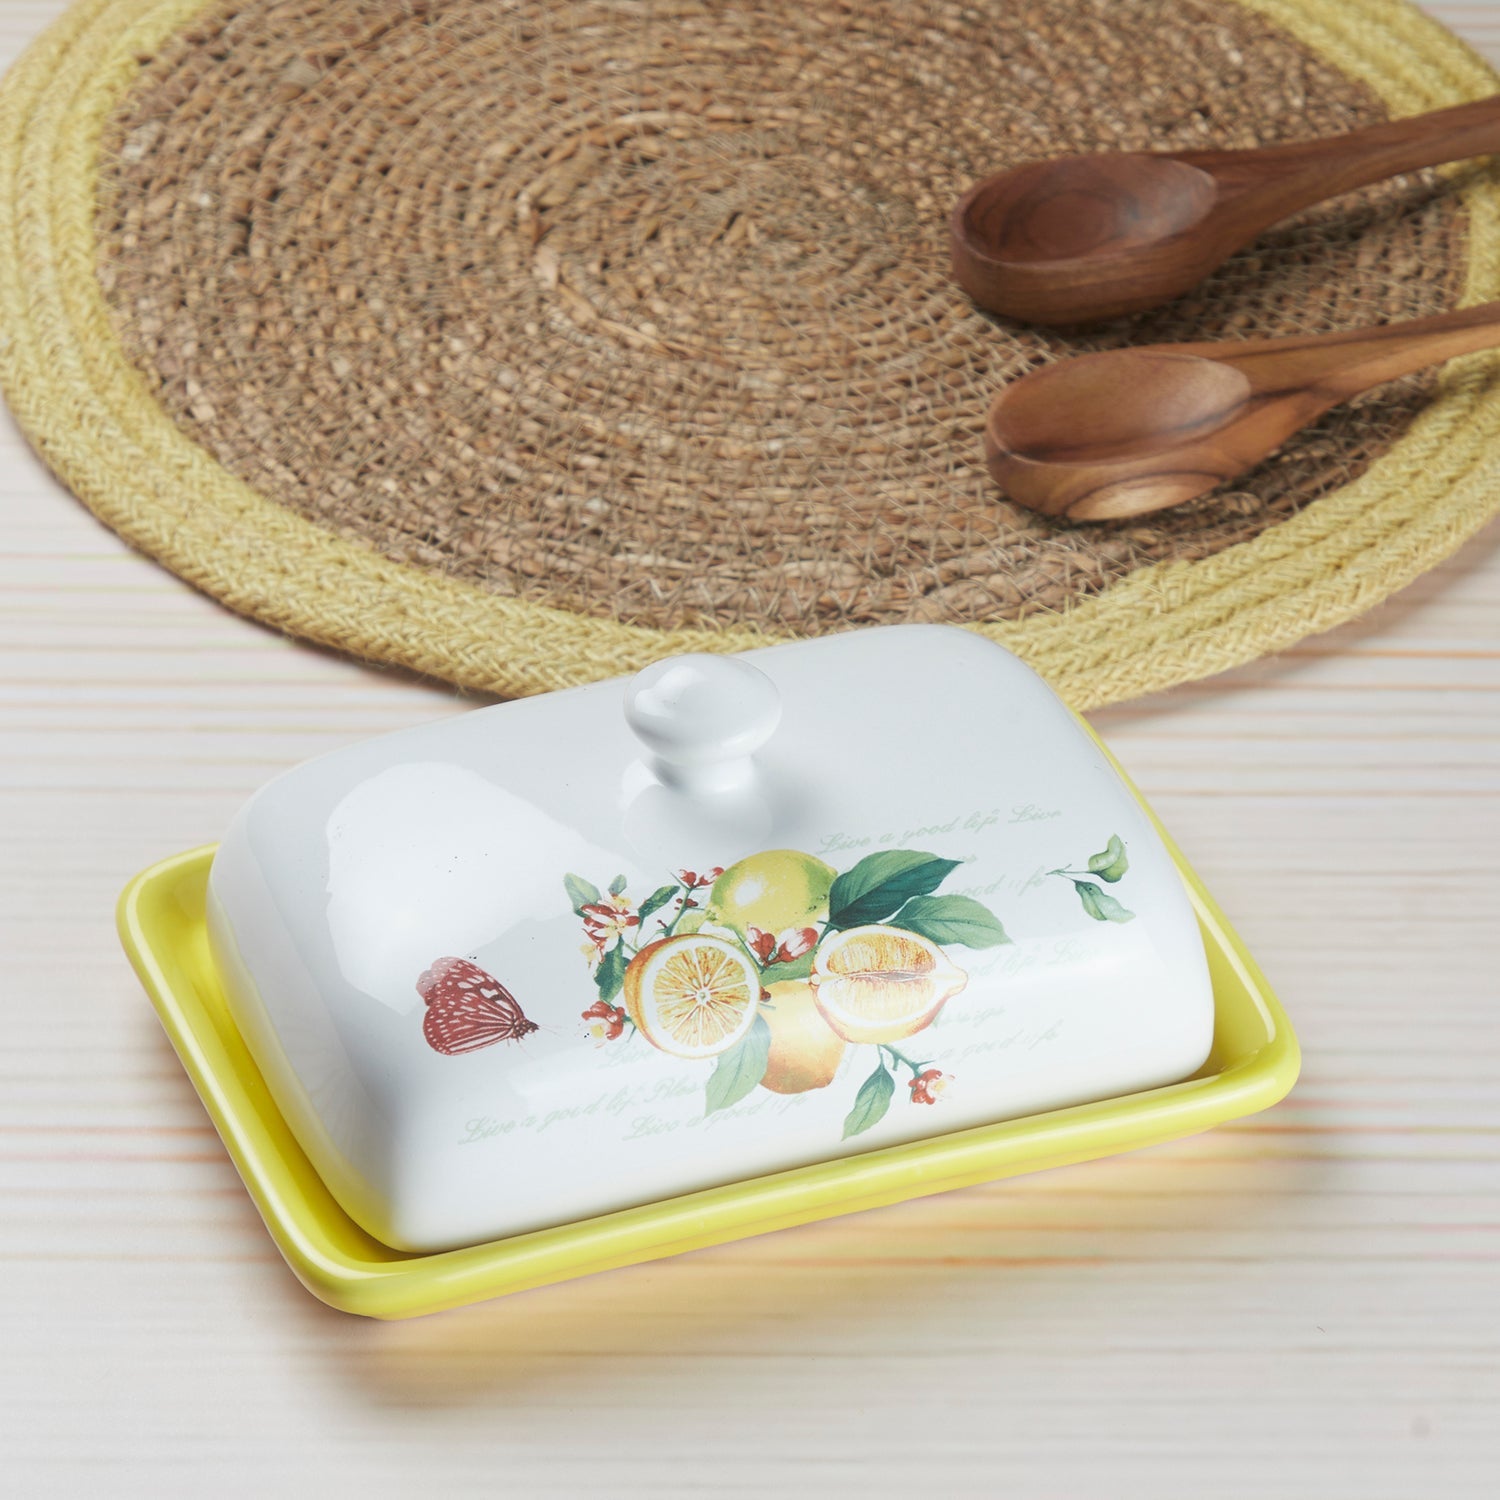 Kookee Ceramic Butter Dish Tray with Lid with 250g capacity for Kitchen, Dining Table & Restaurants (8356)